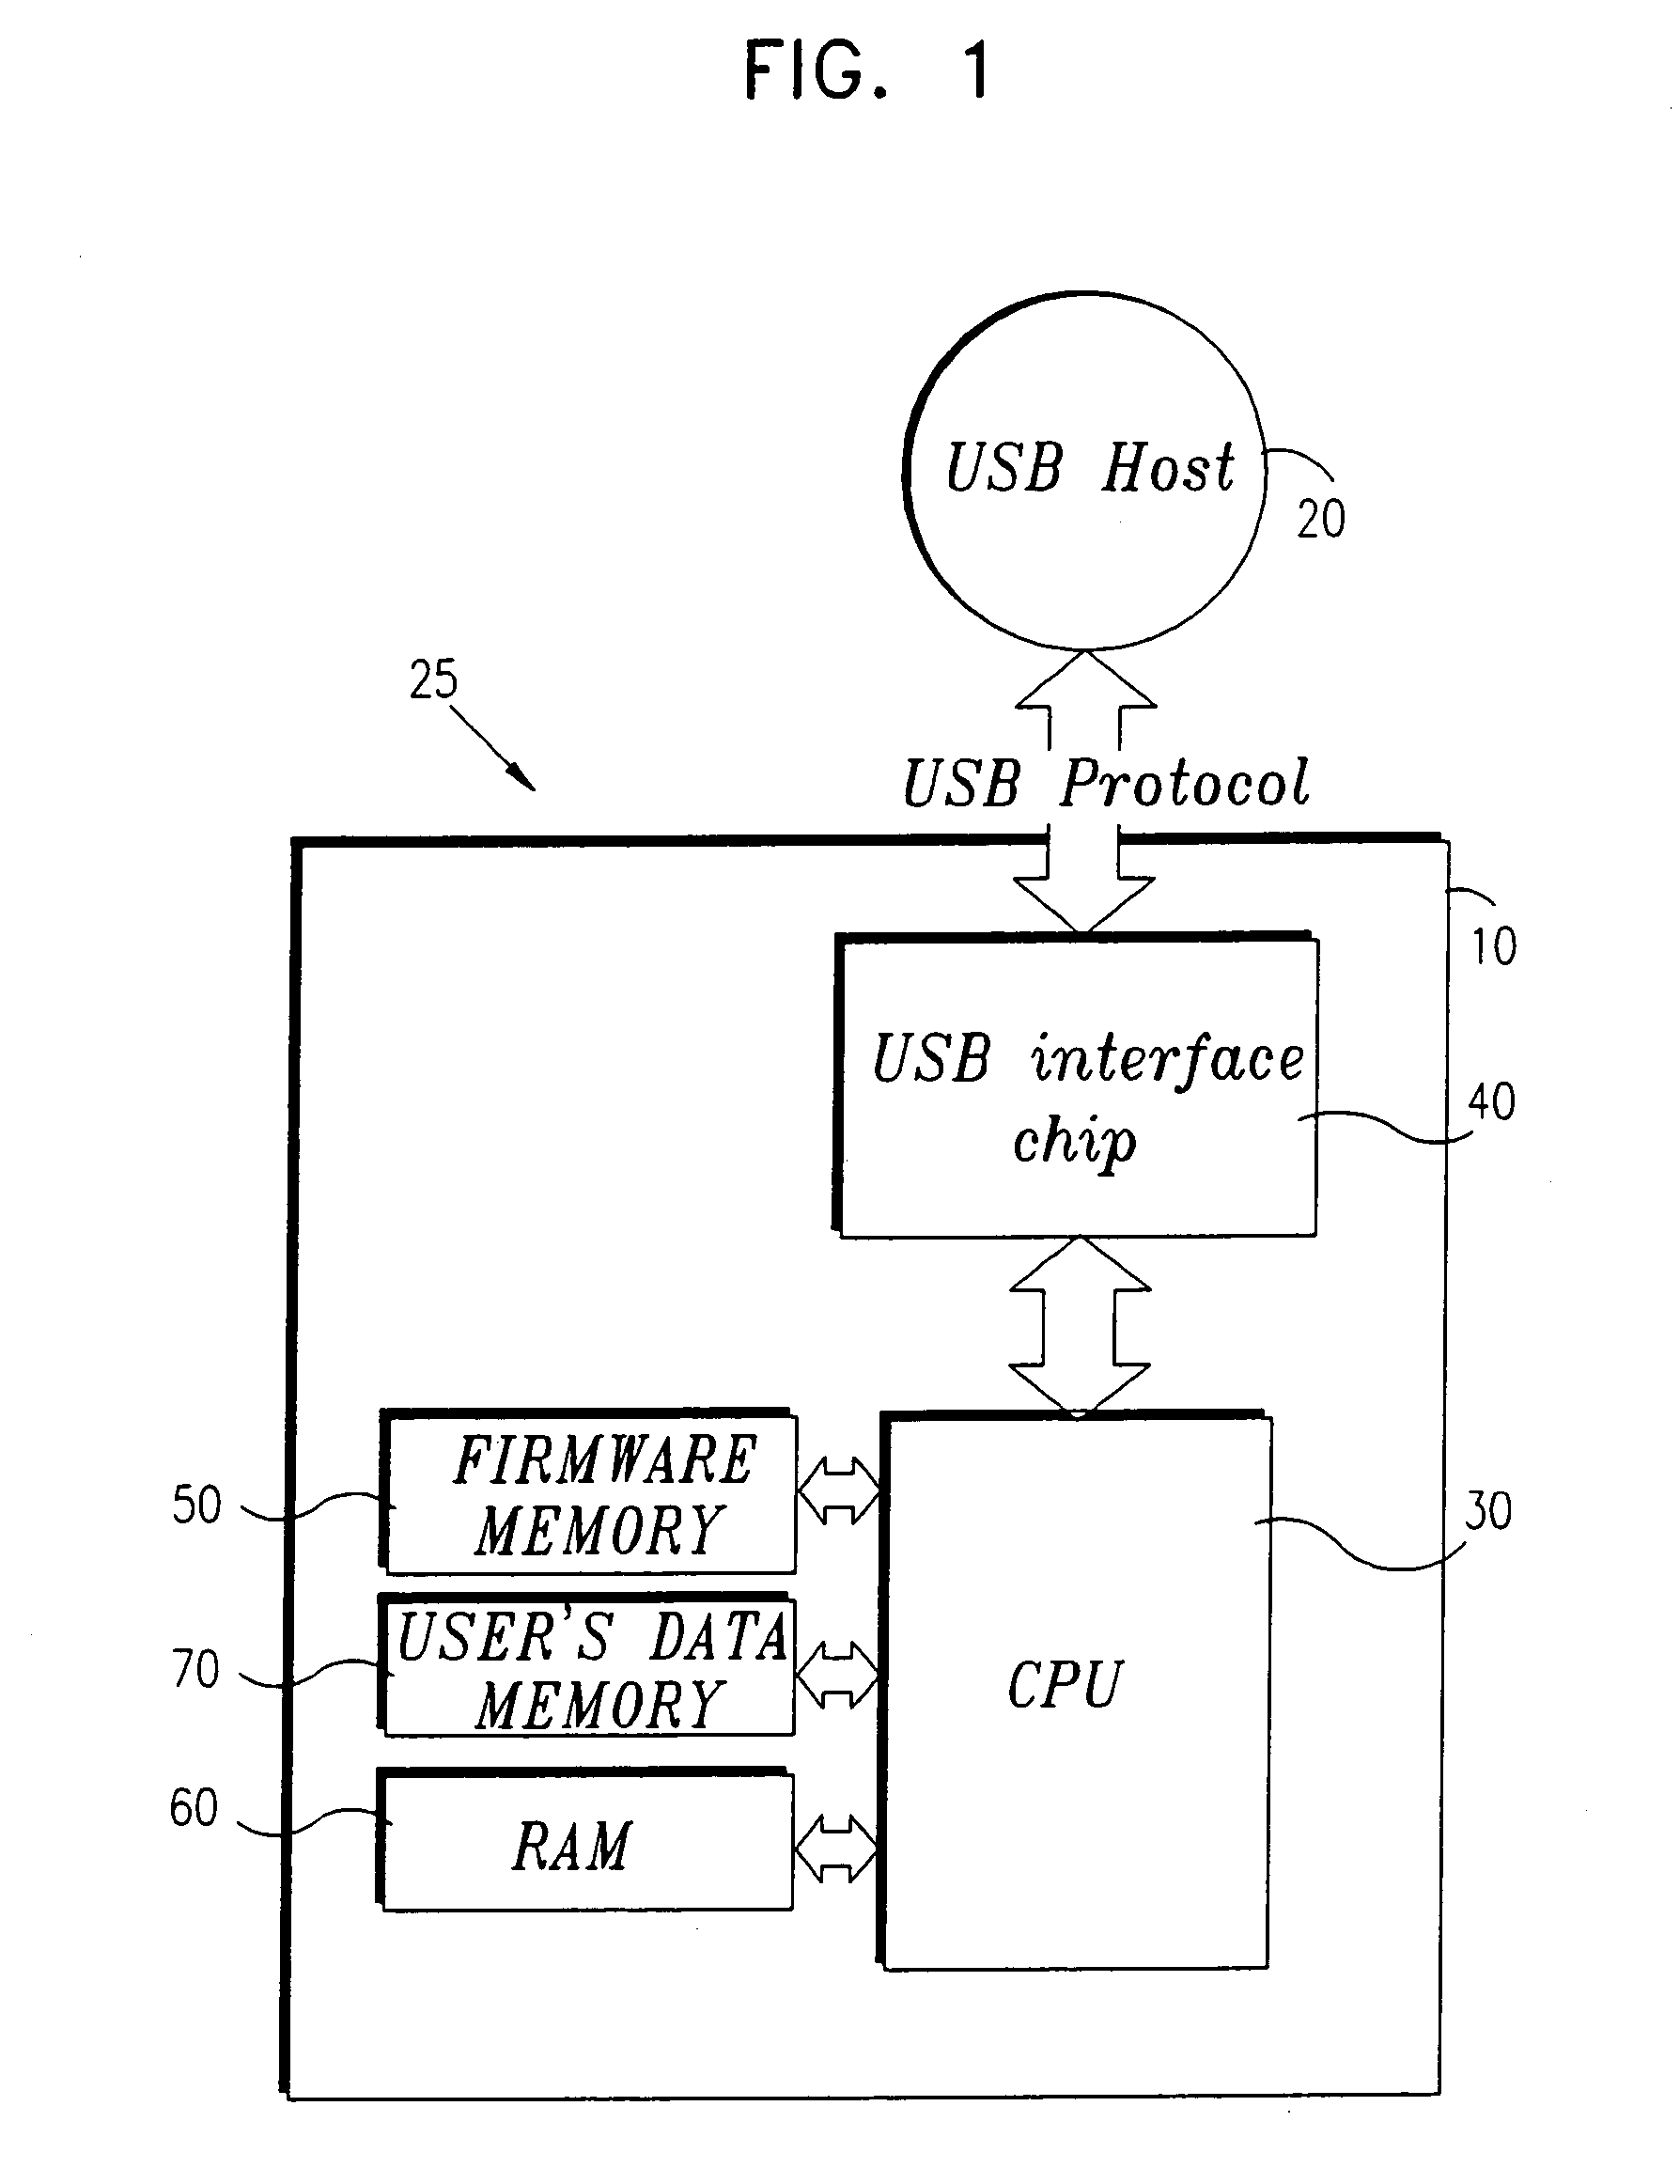 User-computer interaction method for use by a population of flexible connectable computer systems